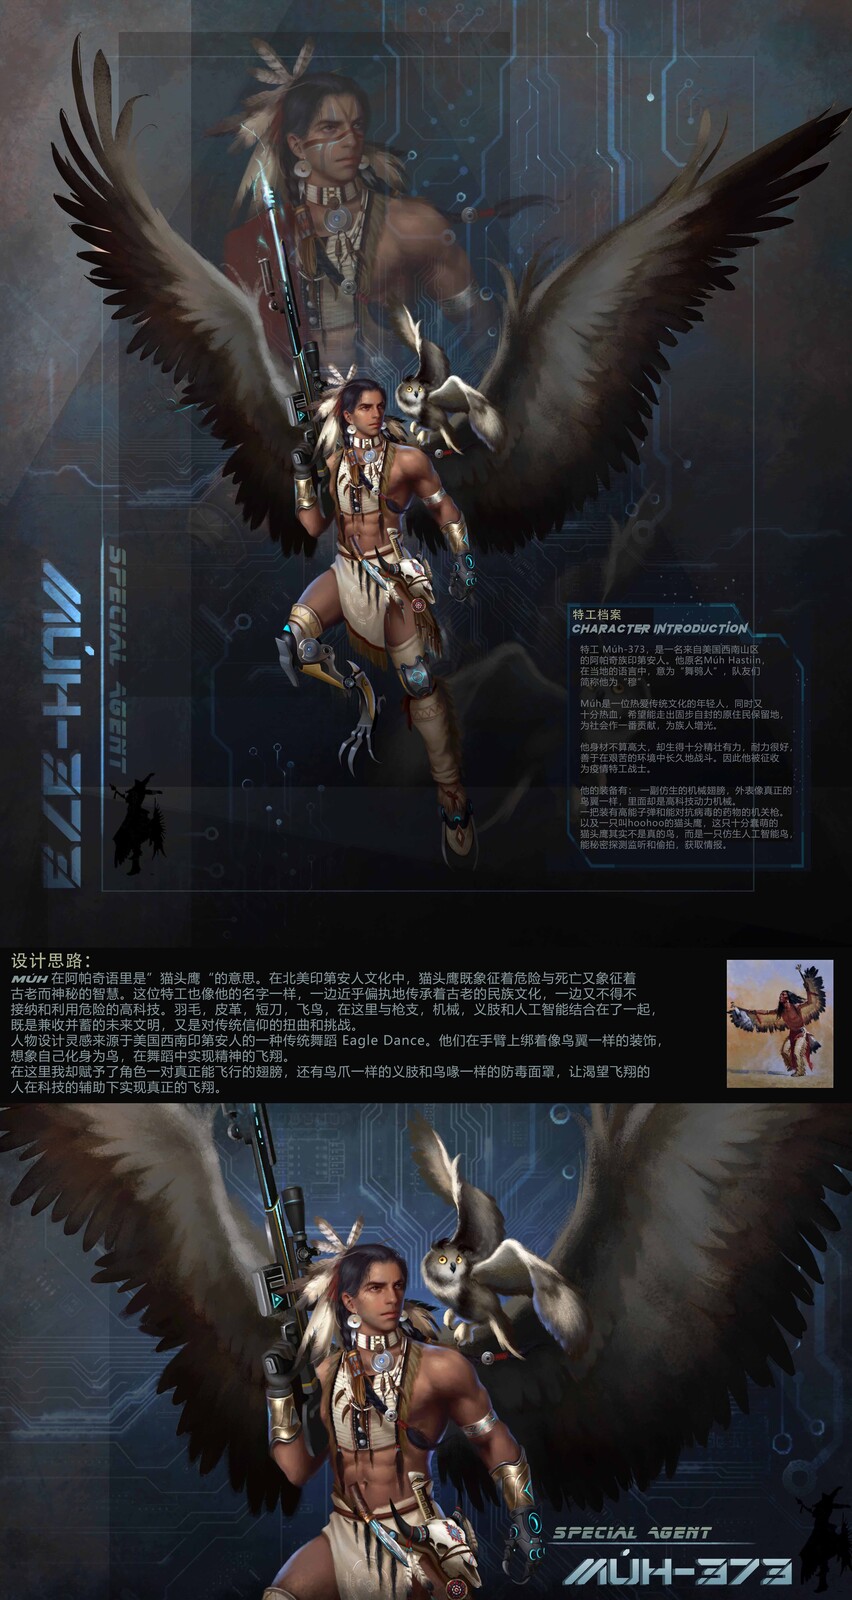 2020 7th Tencent University Art Competition- final round- Character Design: Special Agent Múh-373